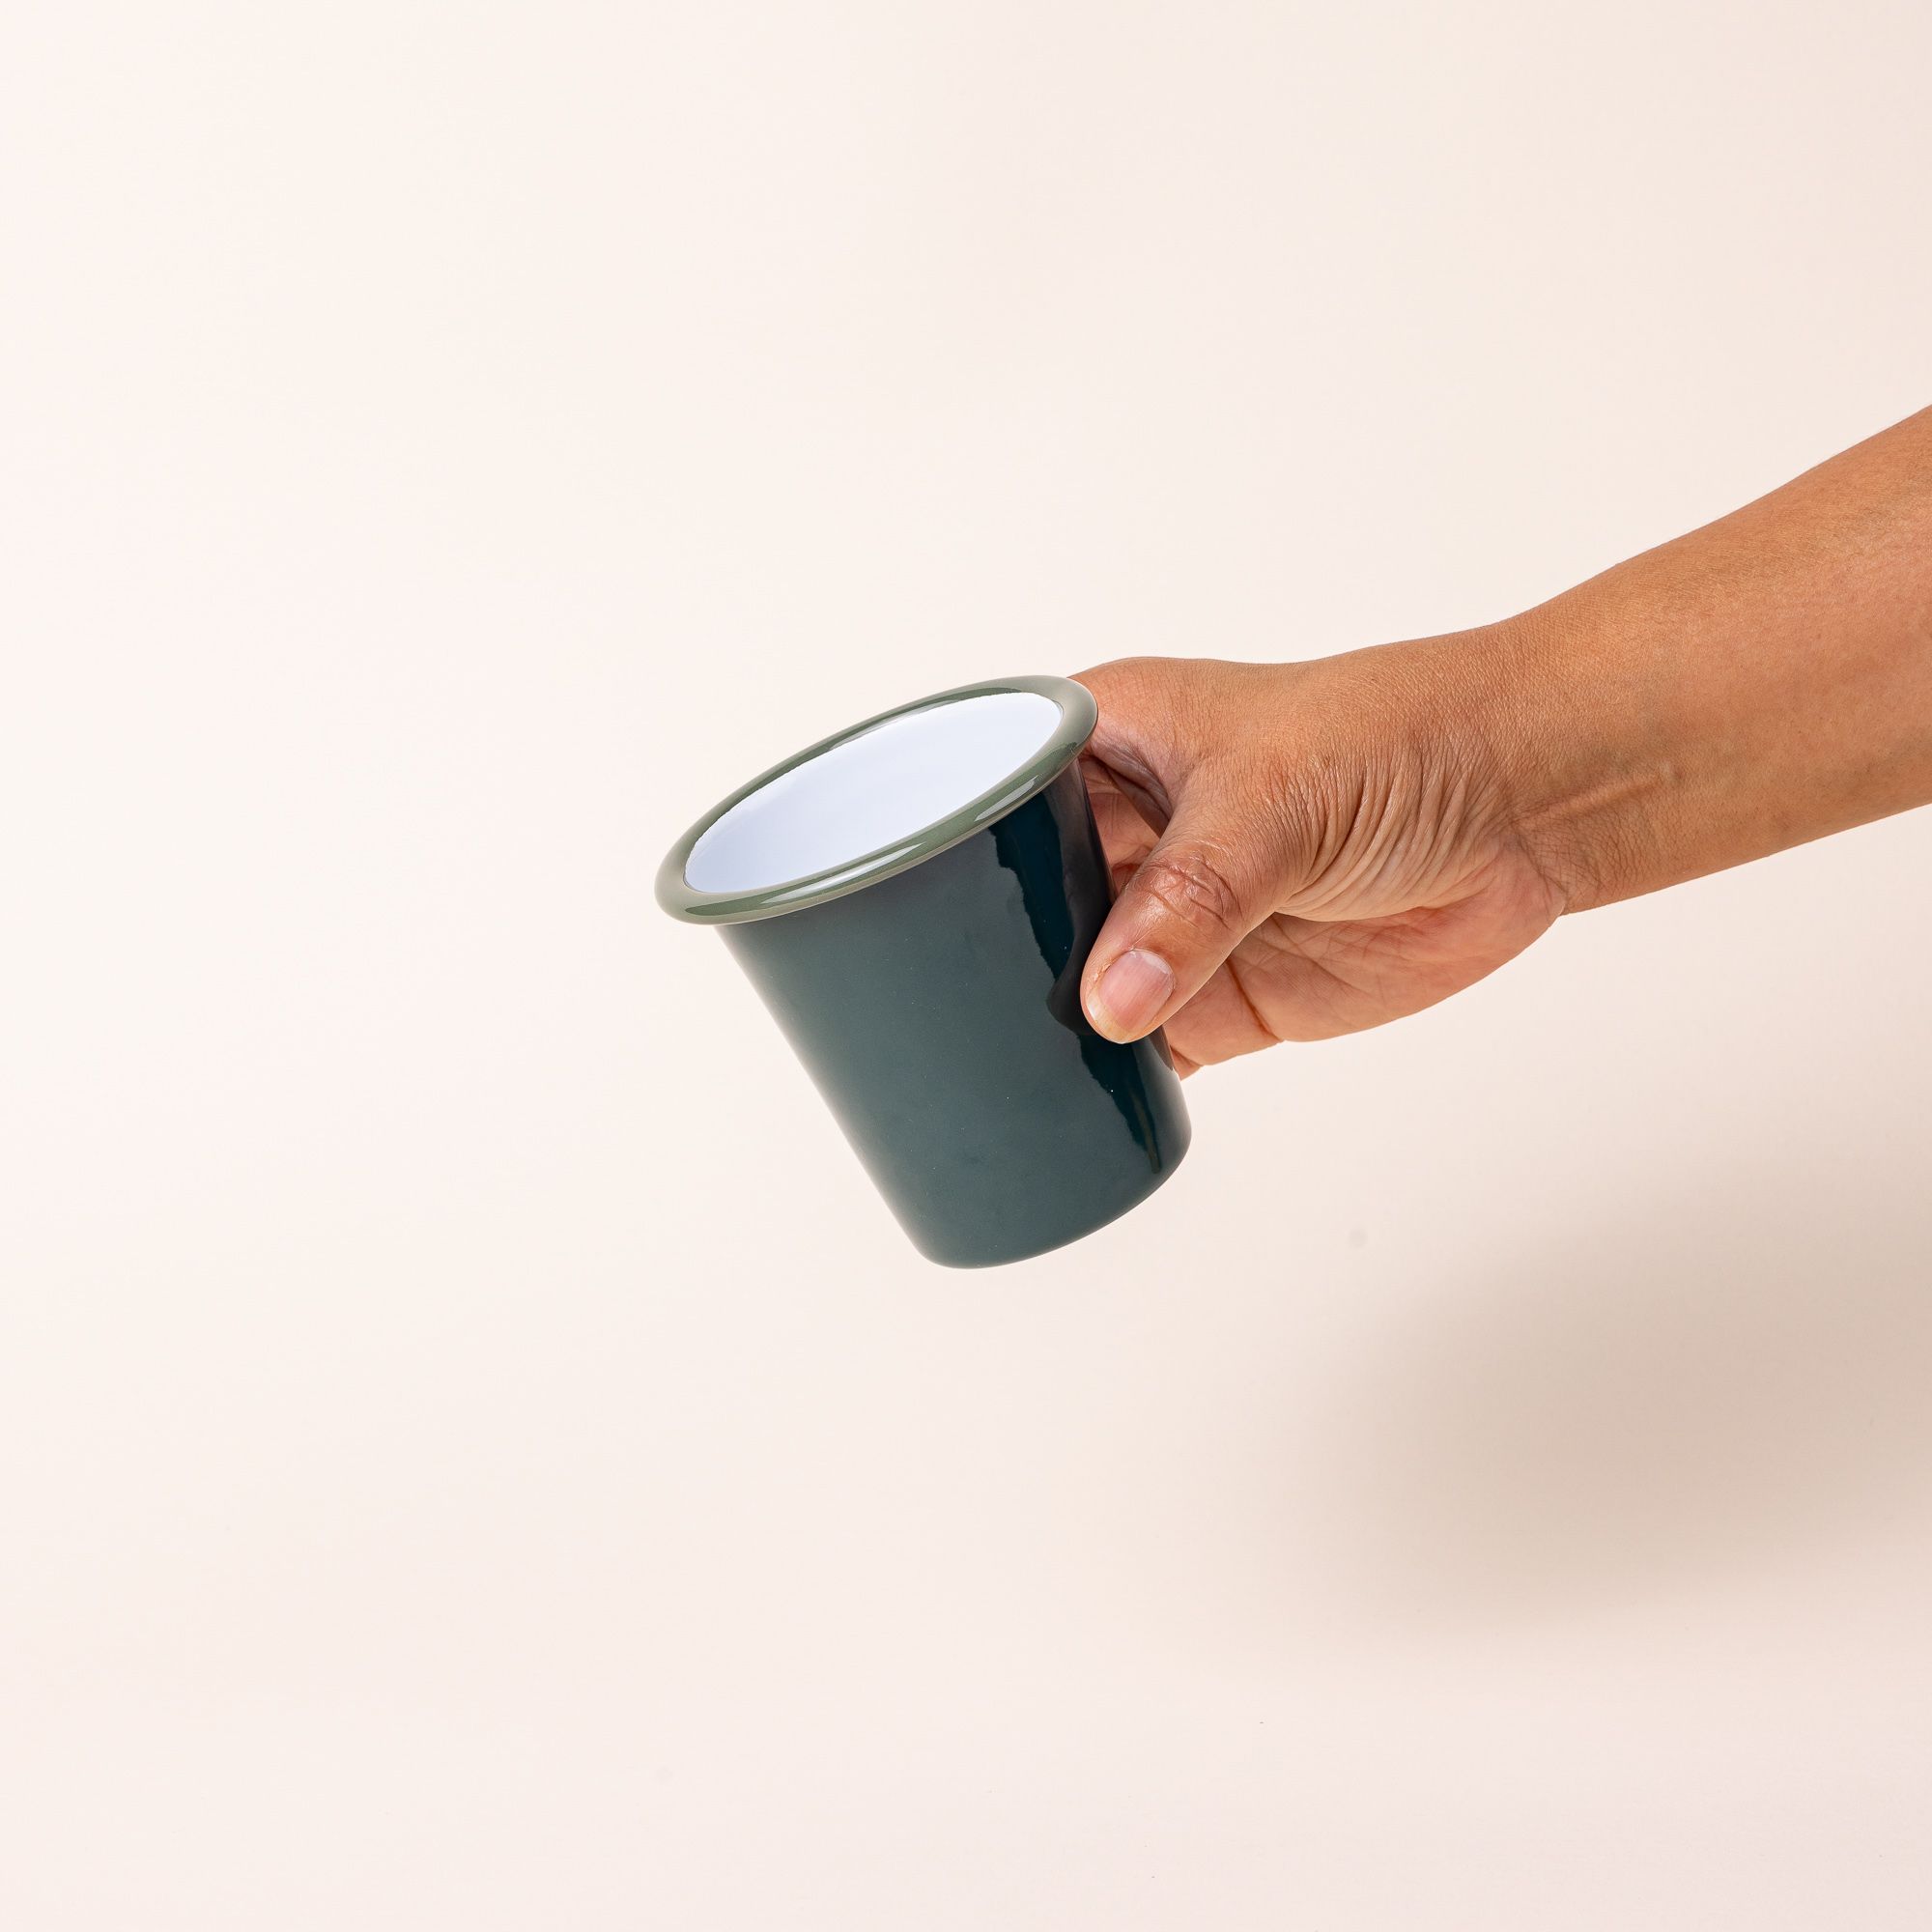 A hand holding a short enamel cup with dark green teal exterior and white interior